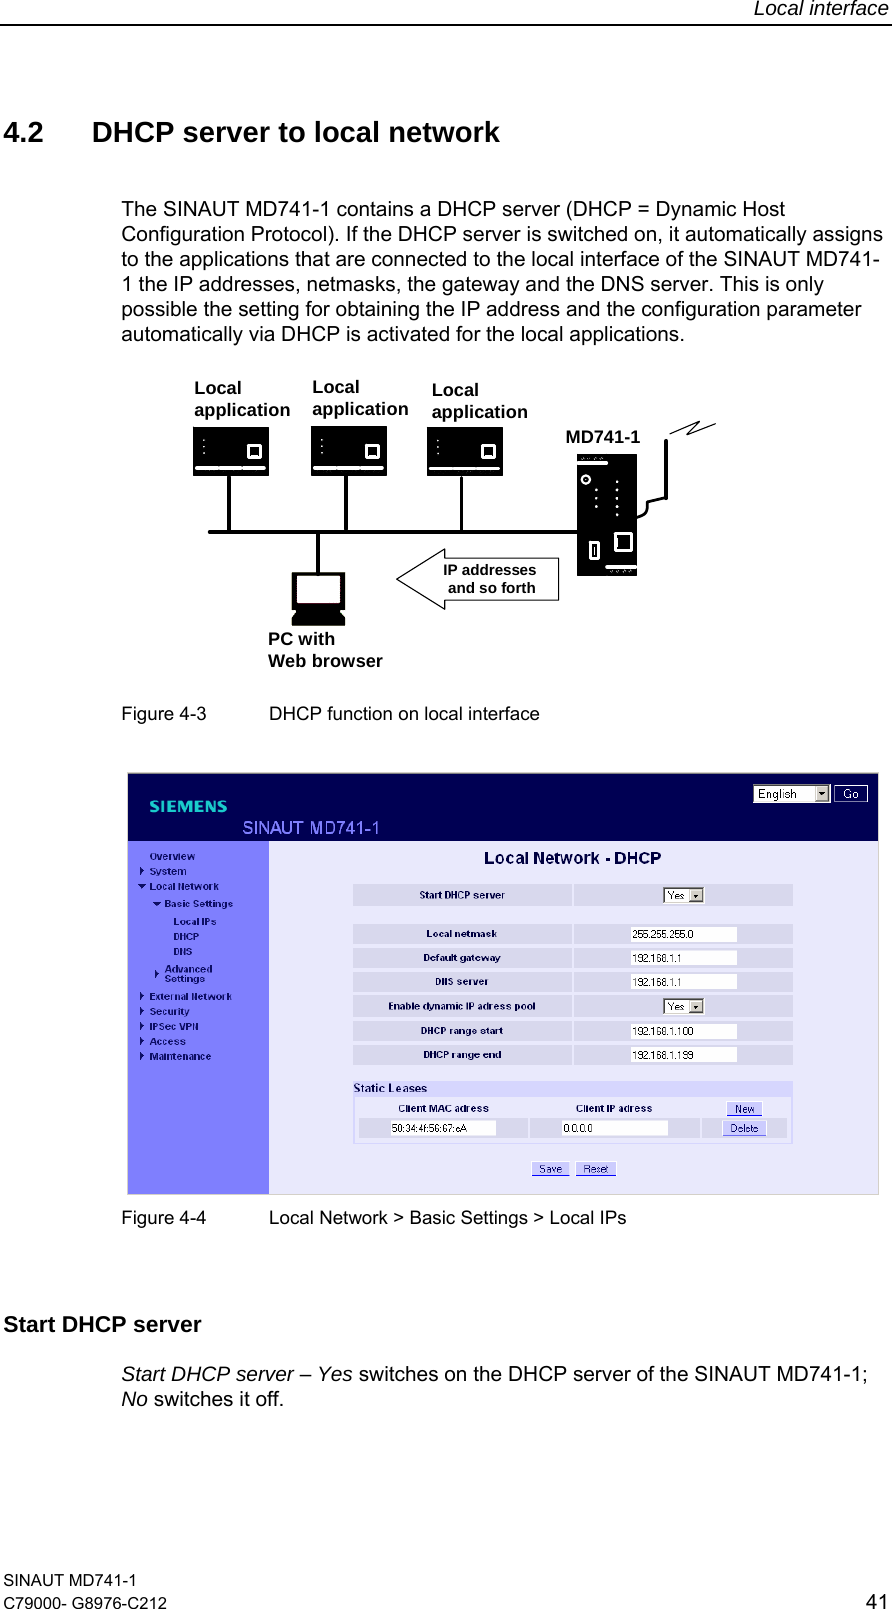 Local interface SINAUT MD741-1 C79000- G8976-C212  41  4.2  DHCP server to local network  The SINAUT MD741-1 contains a DHCP server (DHCP = Dynamic Host Configuration Protocol). If the DHCP server is switched on, it automatically assigns to the applications that are connected to the local interface of the SINAUT MD741-1 the IP addresses, netmasks, the gateway and the DNS server. This is only possible the setting for obtaining the IP address and the configuration parameter automatically via DHCP is activated for the local applications. MD741-1PC withWeb browserLocalapplication Localapplication LocalapplicationIP addressesand so forth  Figure 4-3  DHCP function on local interface     Figure 4-4  Local Network &gt; Basic Settings &gt; Local IPs  Start DHCP server Start DHCP server – Yes switches on the DHCP server of the SINAUT MD741-1; No switches it off. 